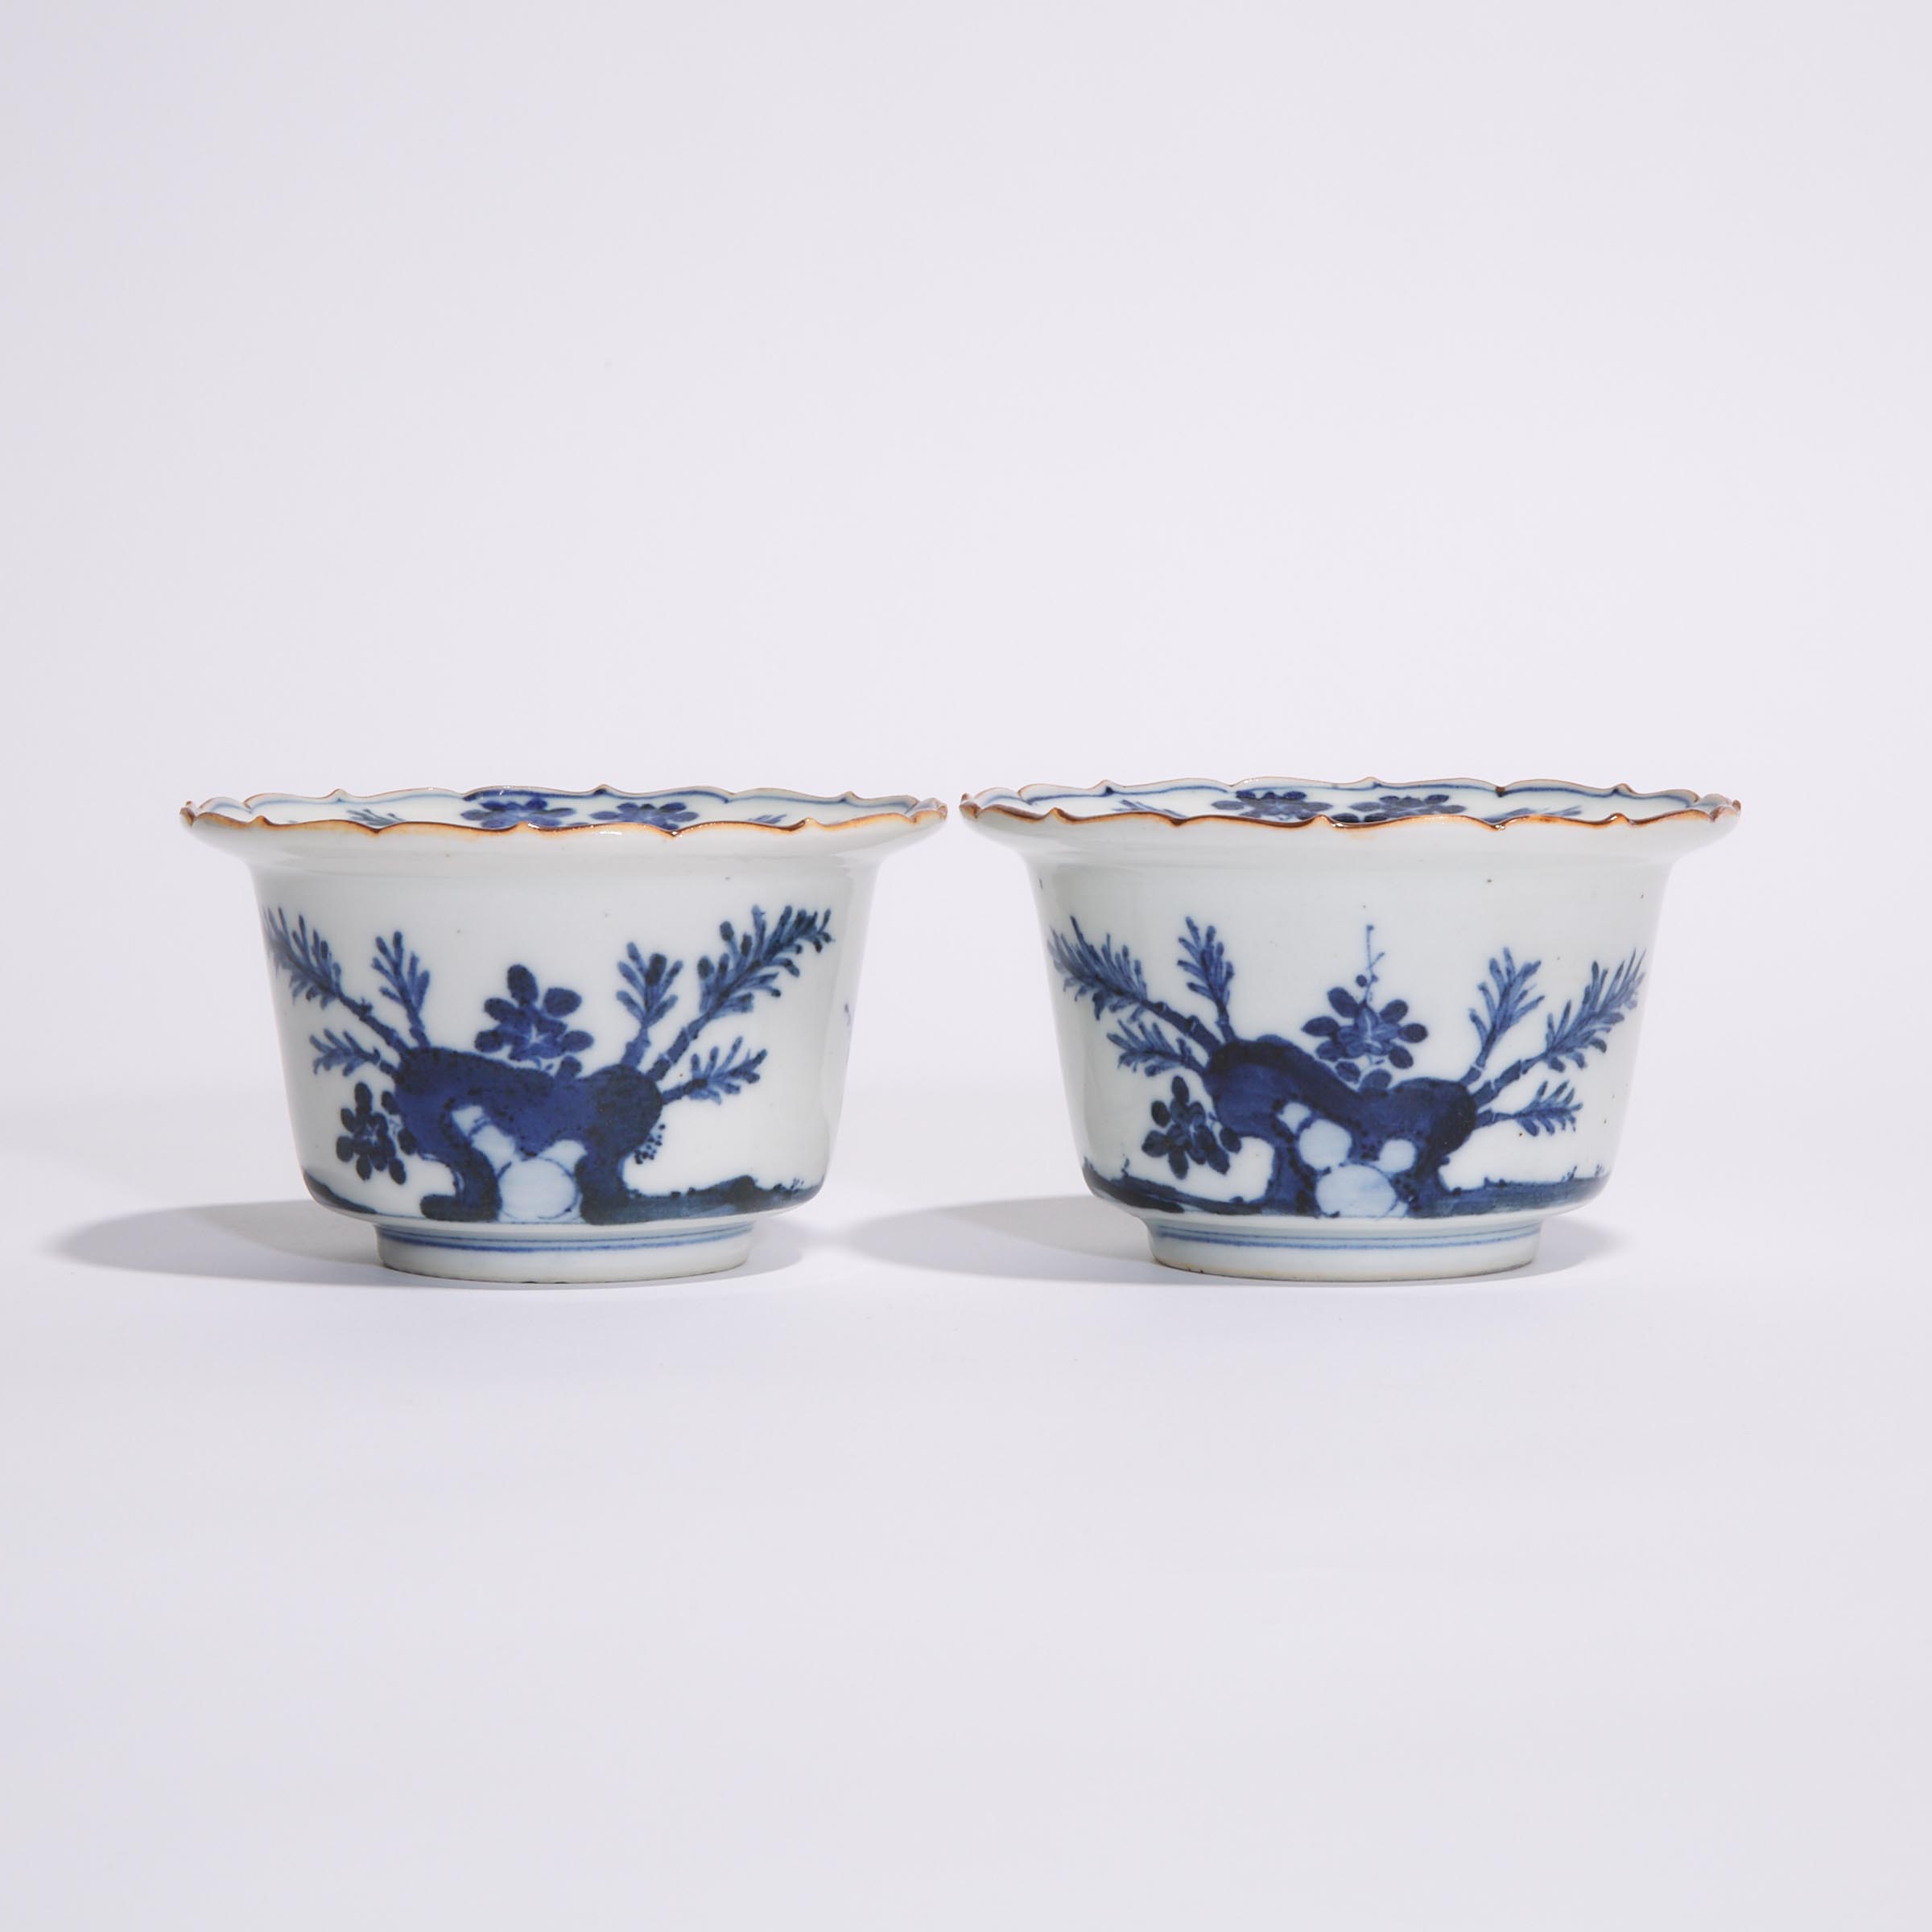 A Pair of Arita Blue and White Bowls With Design After Cornelis Pronk (Dutch, 1691-1759), Edo Period, Mid 18th Century